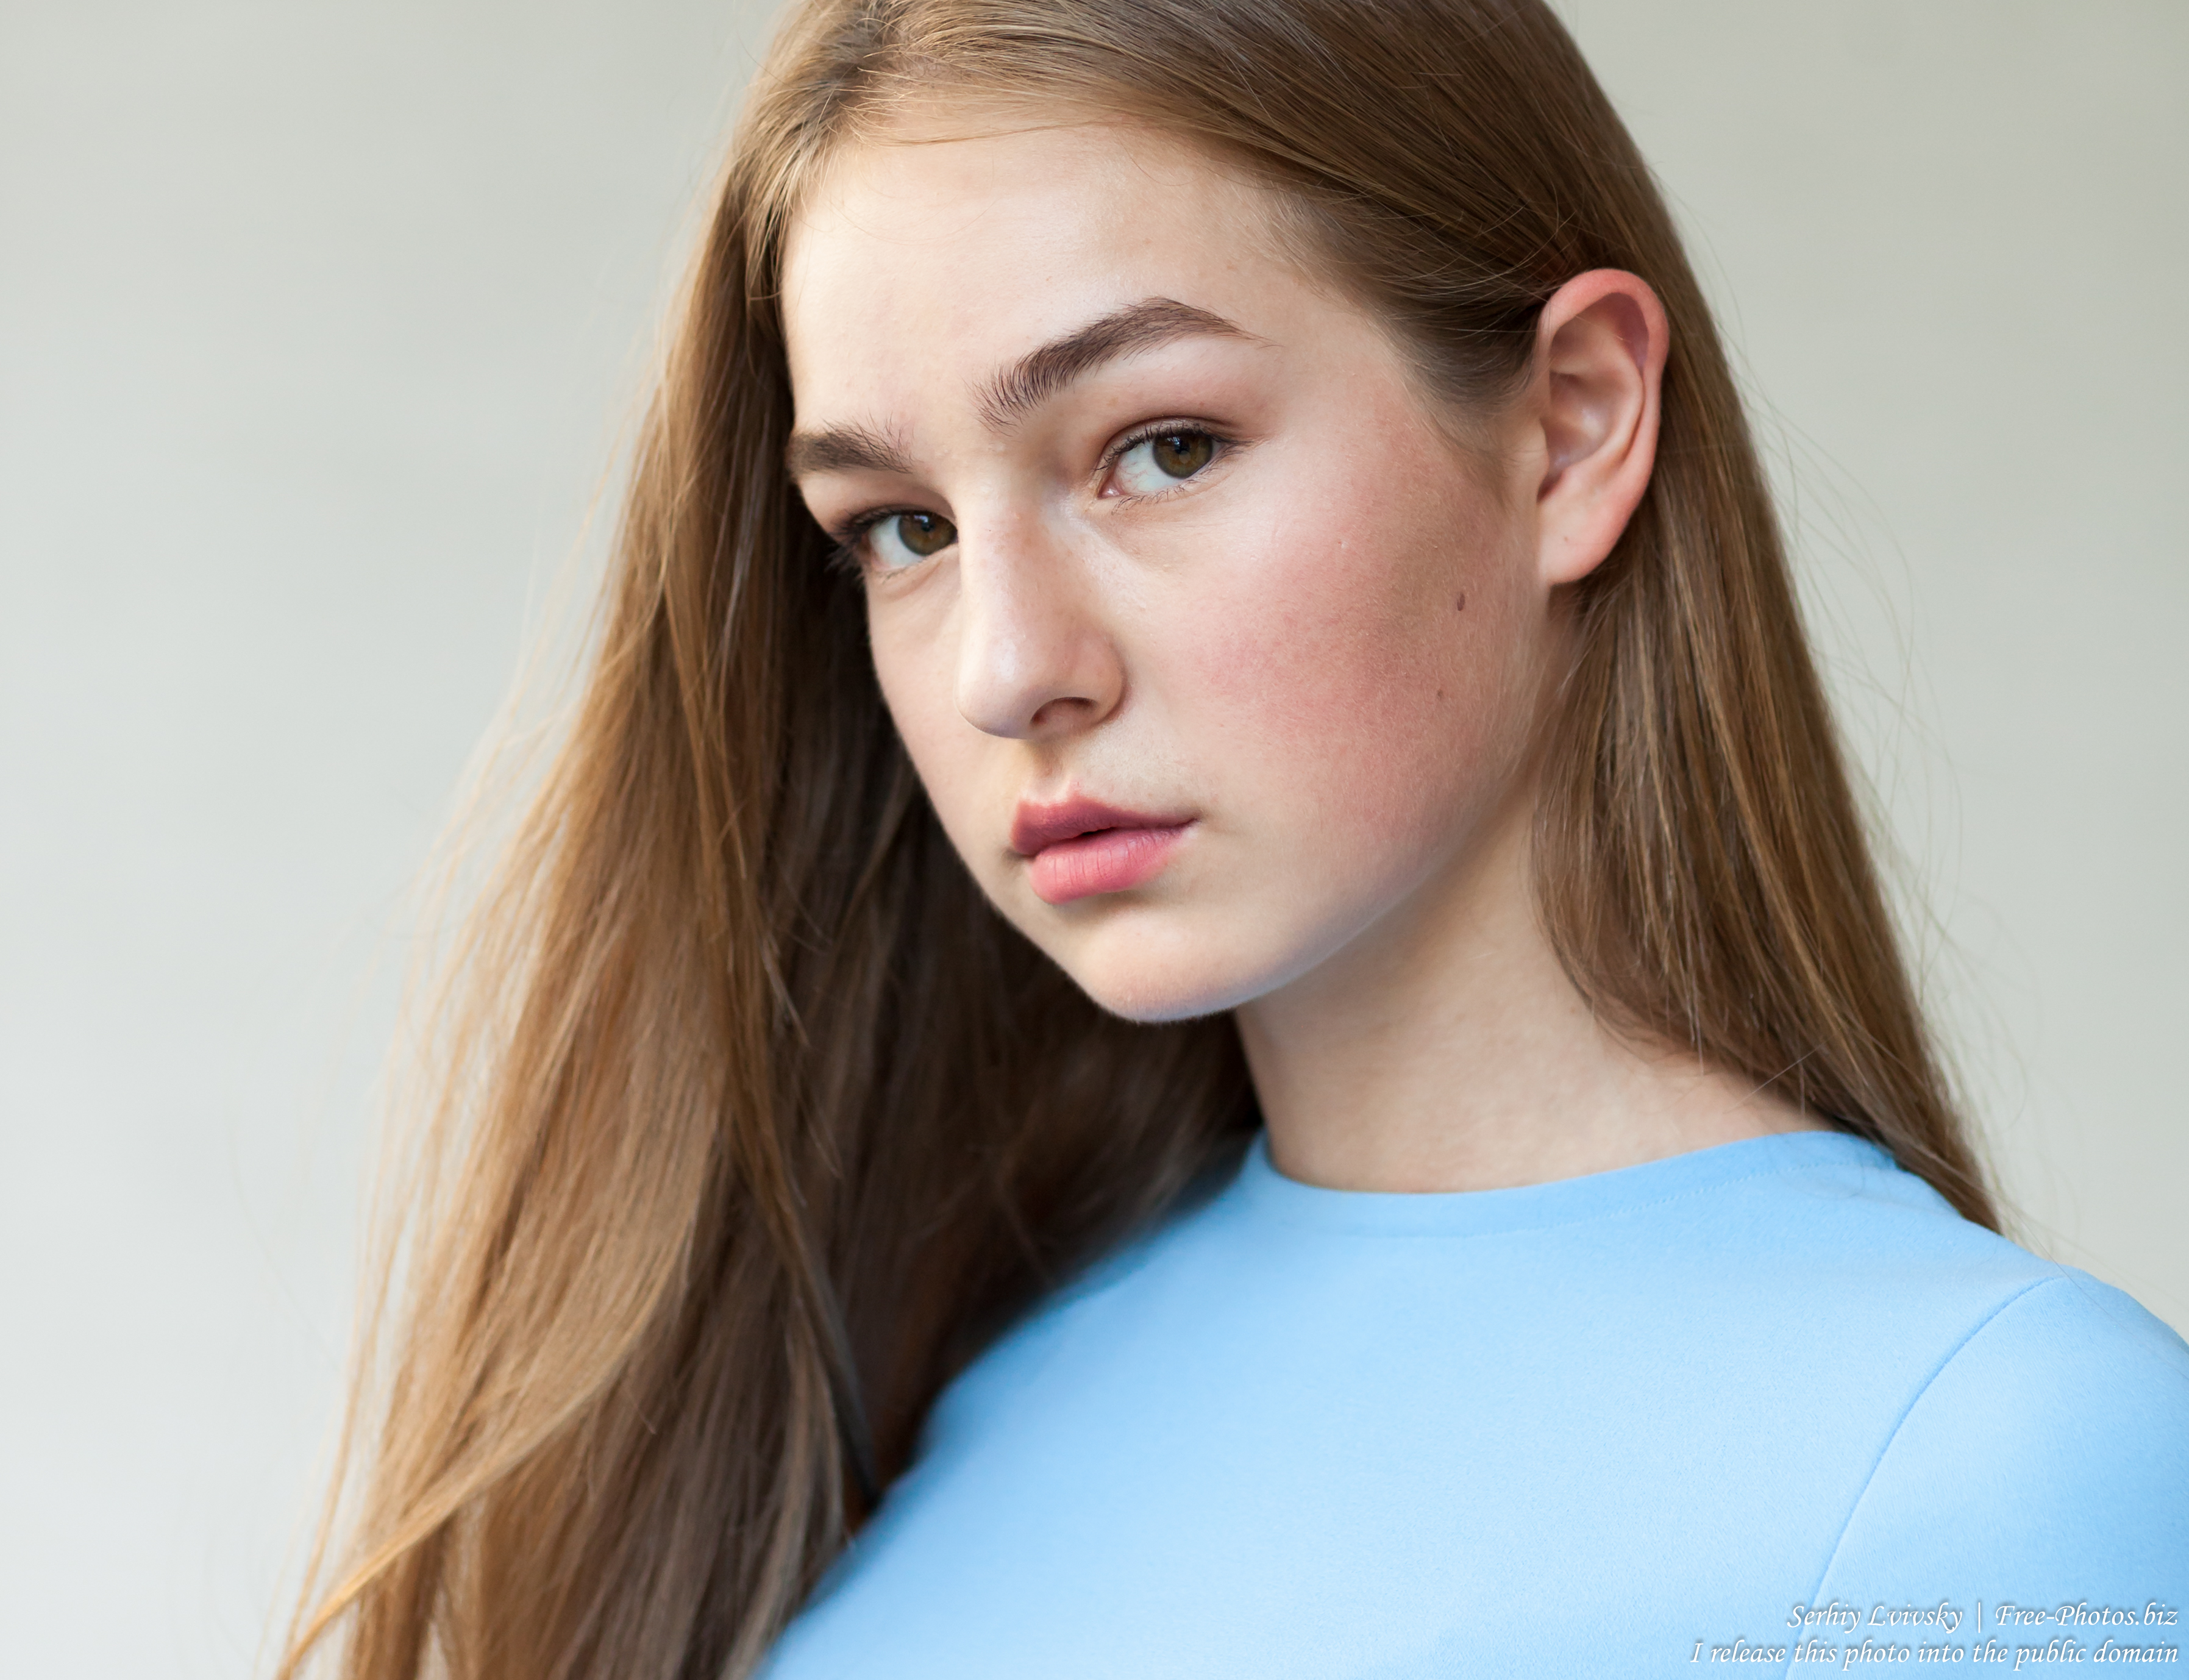 Justyna - a 16-year-old fair-haired girl photographed in June 2018 by Serhiy Lvivsky, picture 8